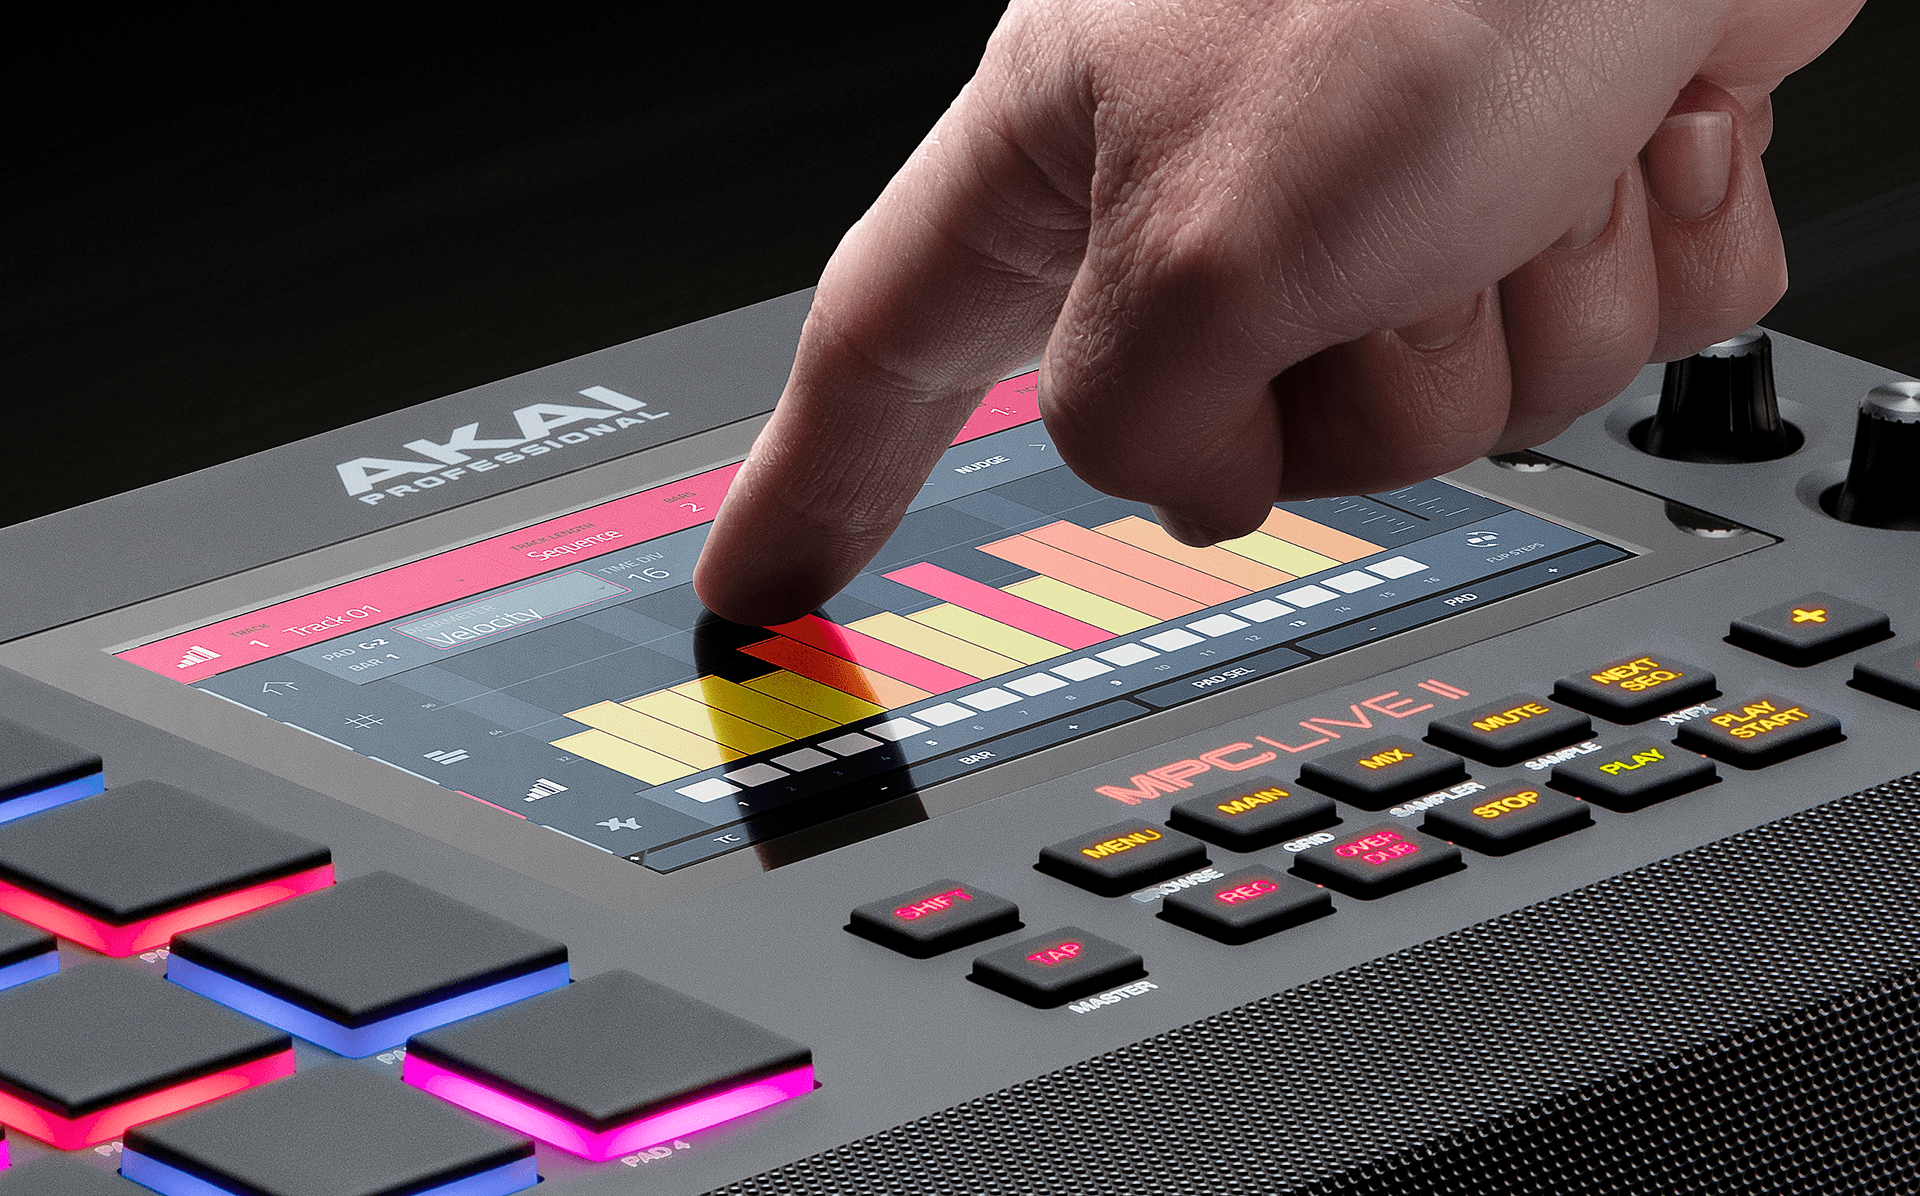 Beat Making Drum Machine with Multi Gesture Touch Screen Interface